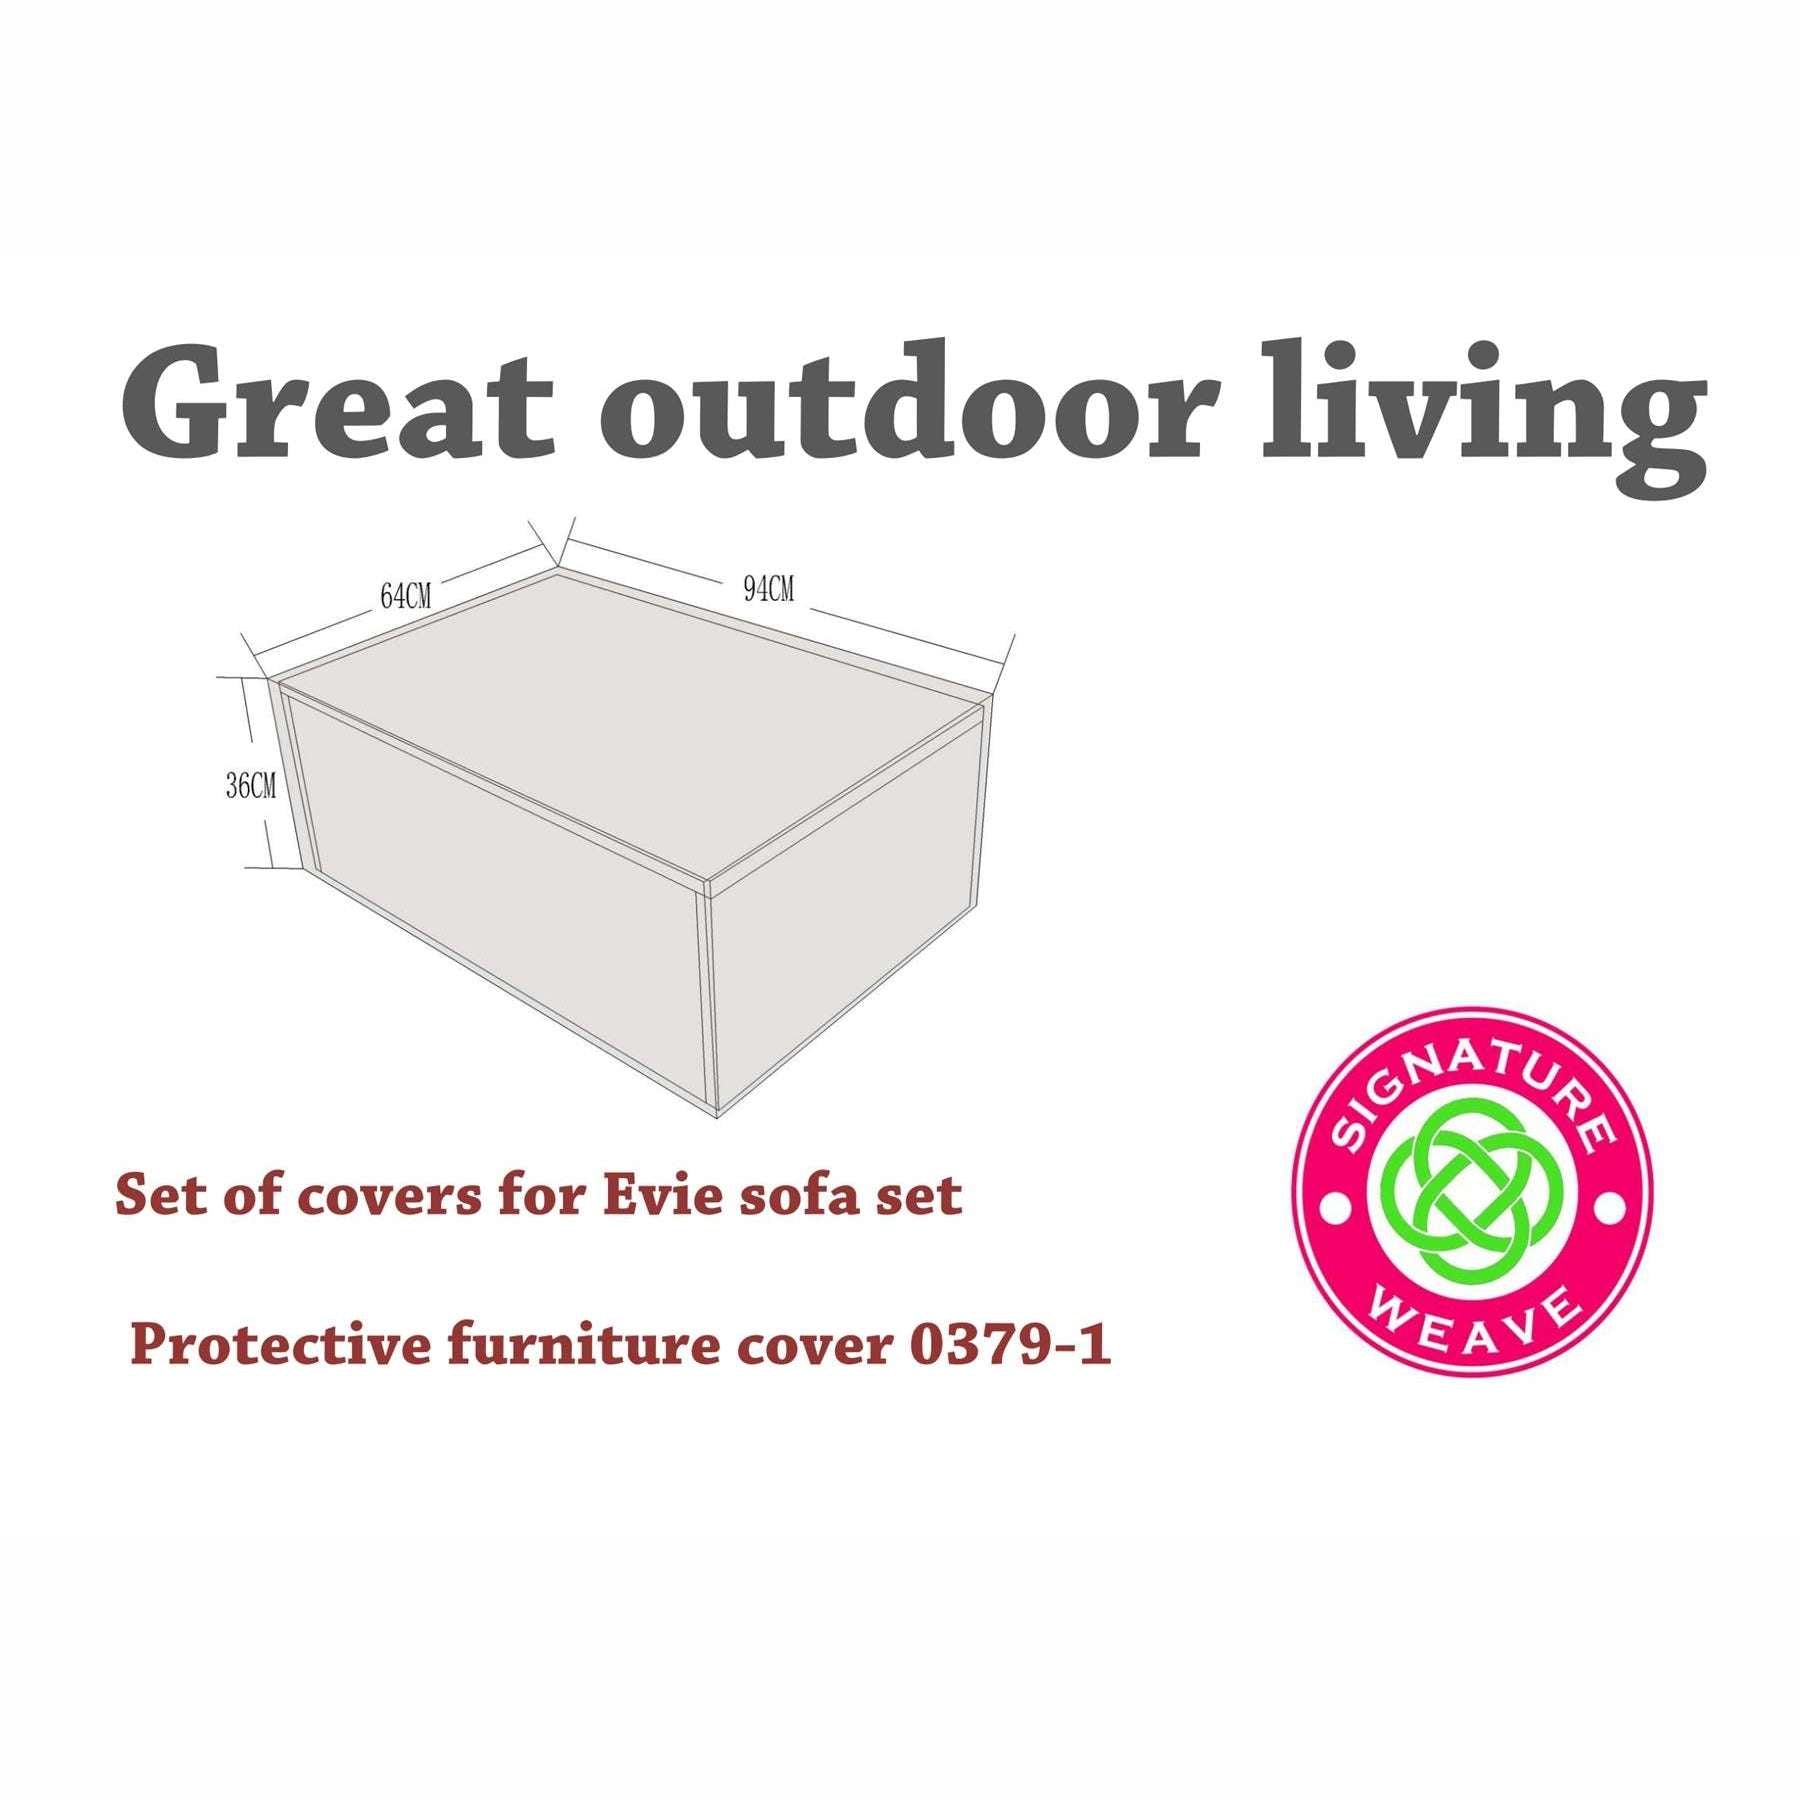 Exceptional Garden:Signature Weave Evie Furniture Cover